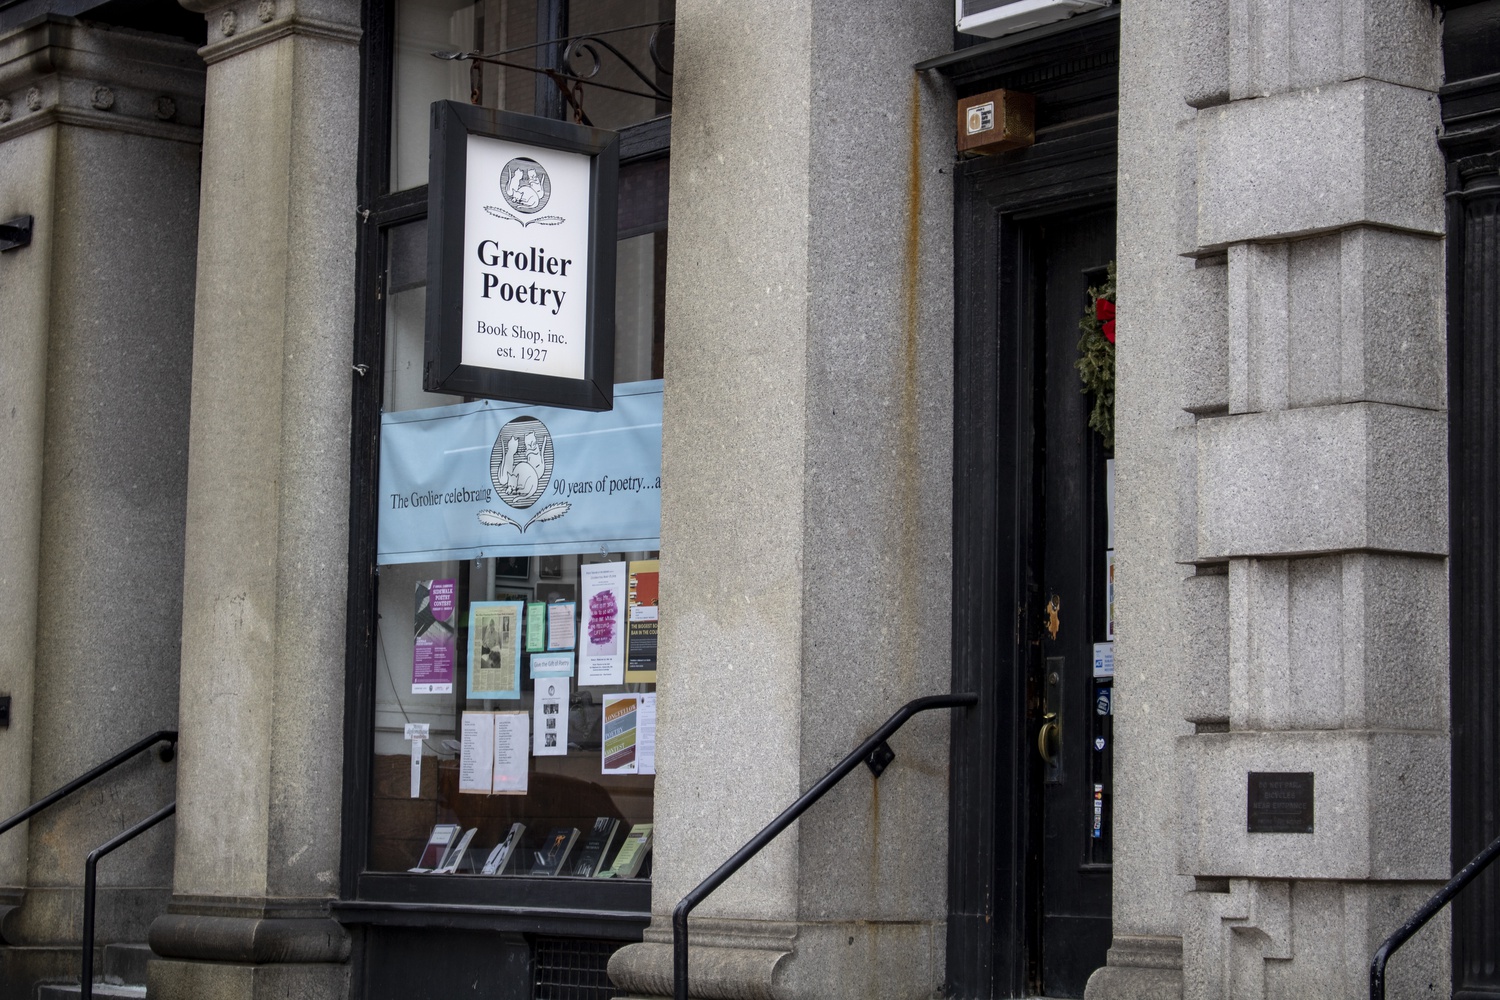 Grolier Poetry Book Shop, founded in 1927, is located on 6 Plympton St.